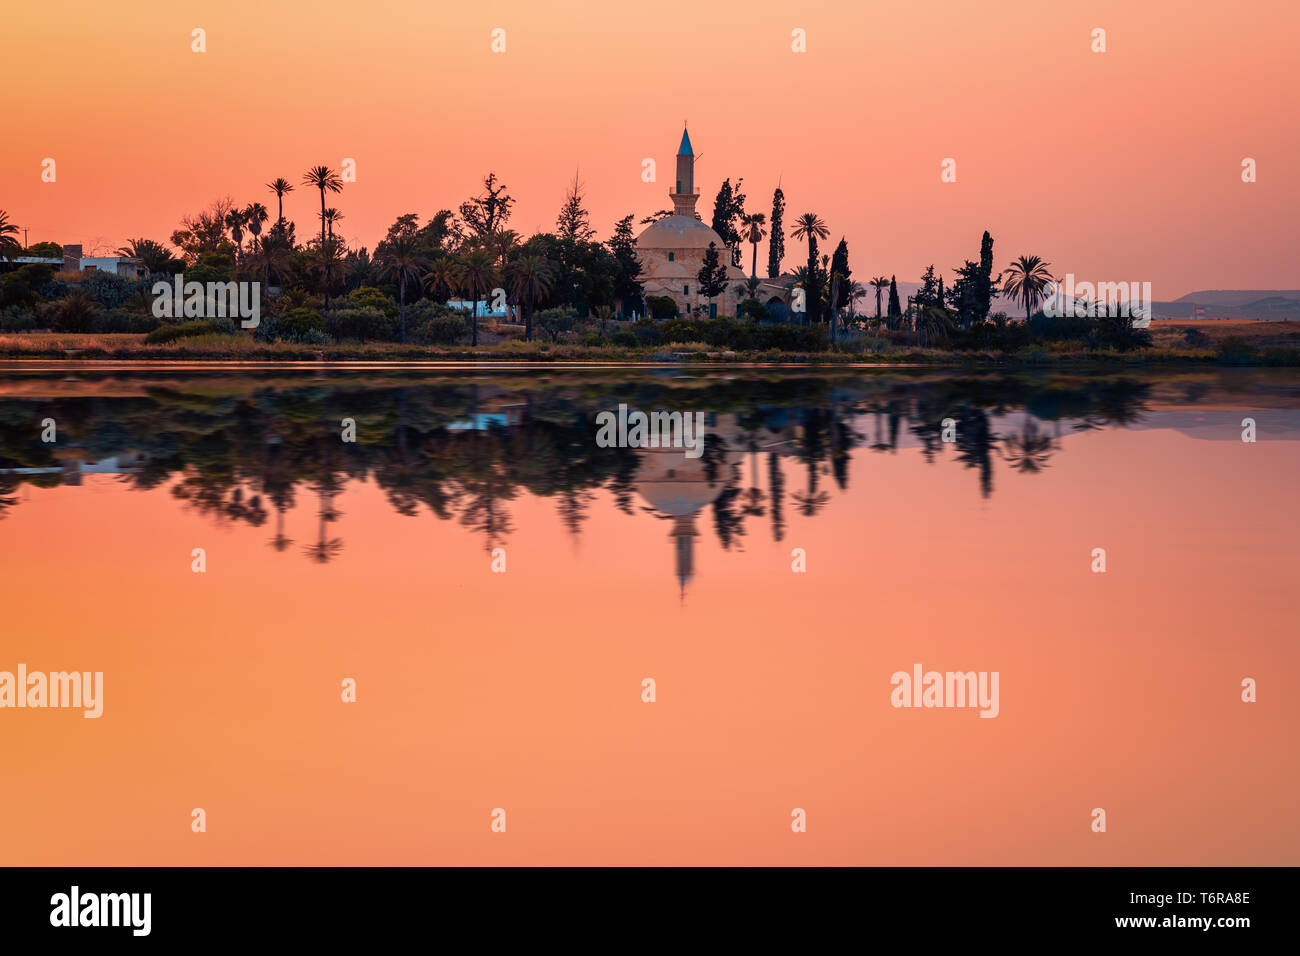 The ancient mosque Hala Sultan Tekkes on the shore of the salt lake in Larnaca, Cyprus during the sunset Stock Photo